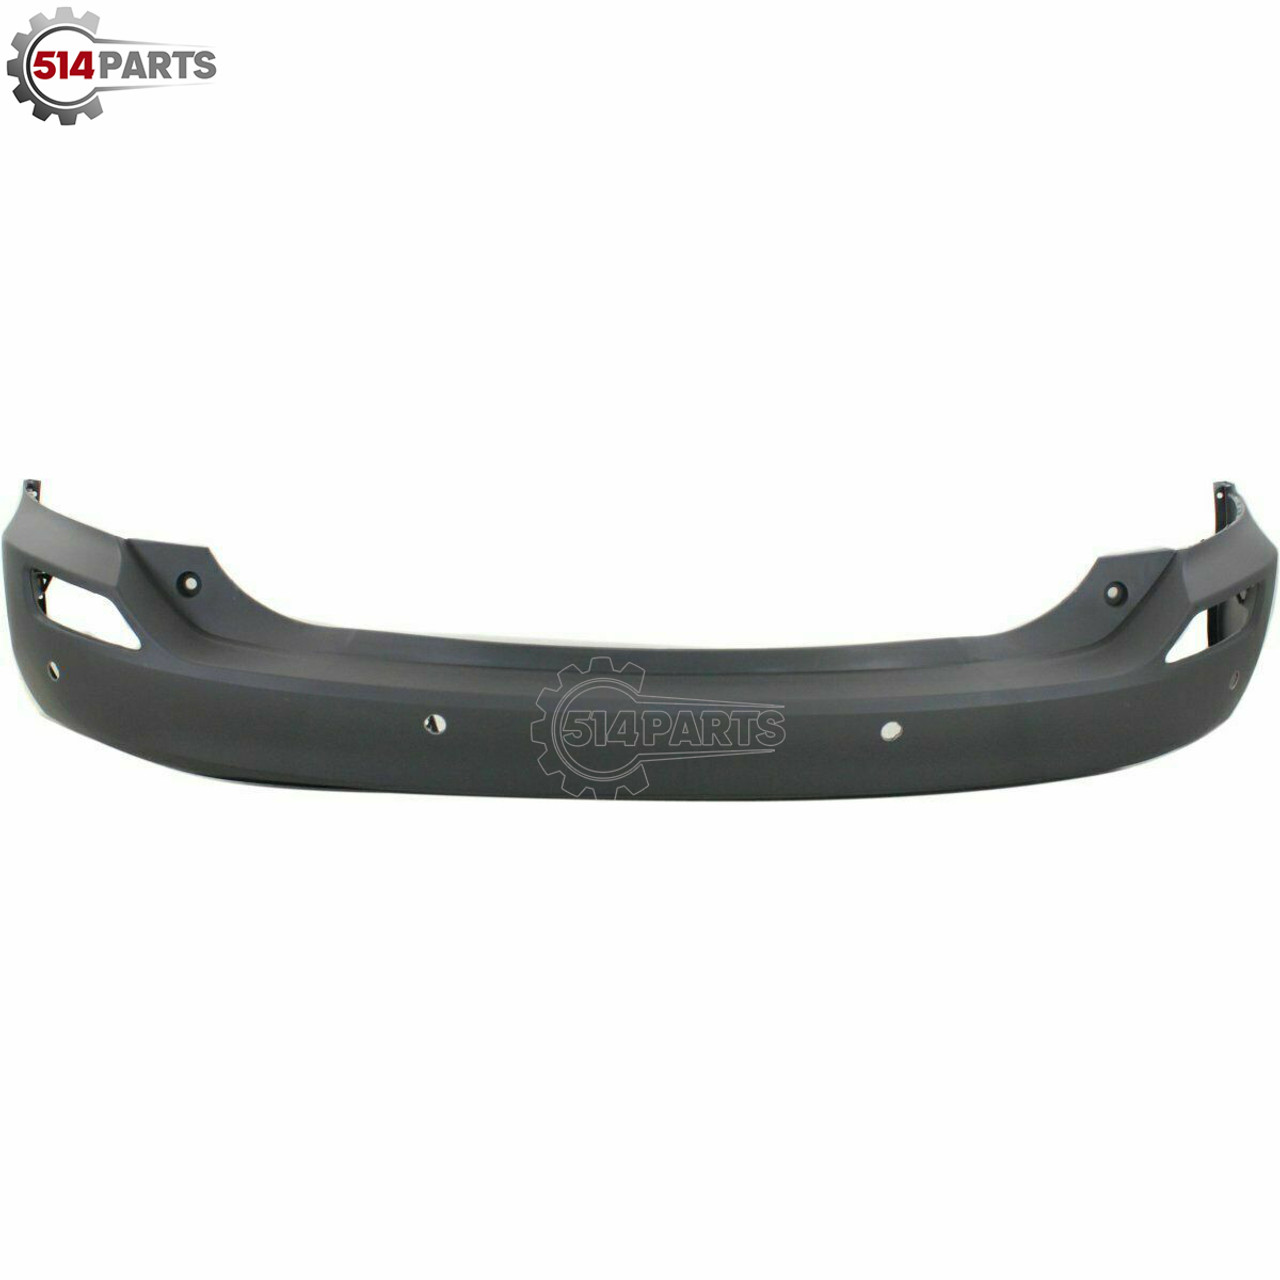 2013 - 2015 TOYOTA RAV4 TEXTURED REAR BUMPER COVER with SENSOR HOLES - PARE-CHOCS ARRIERE TEXTURE